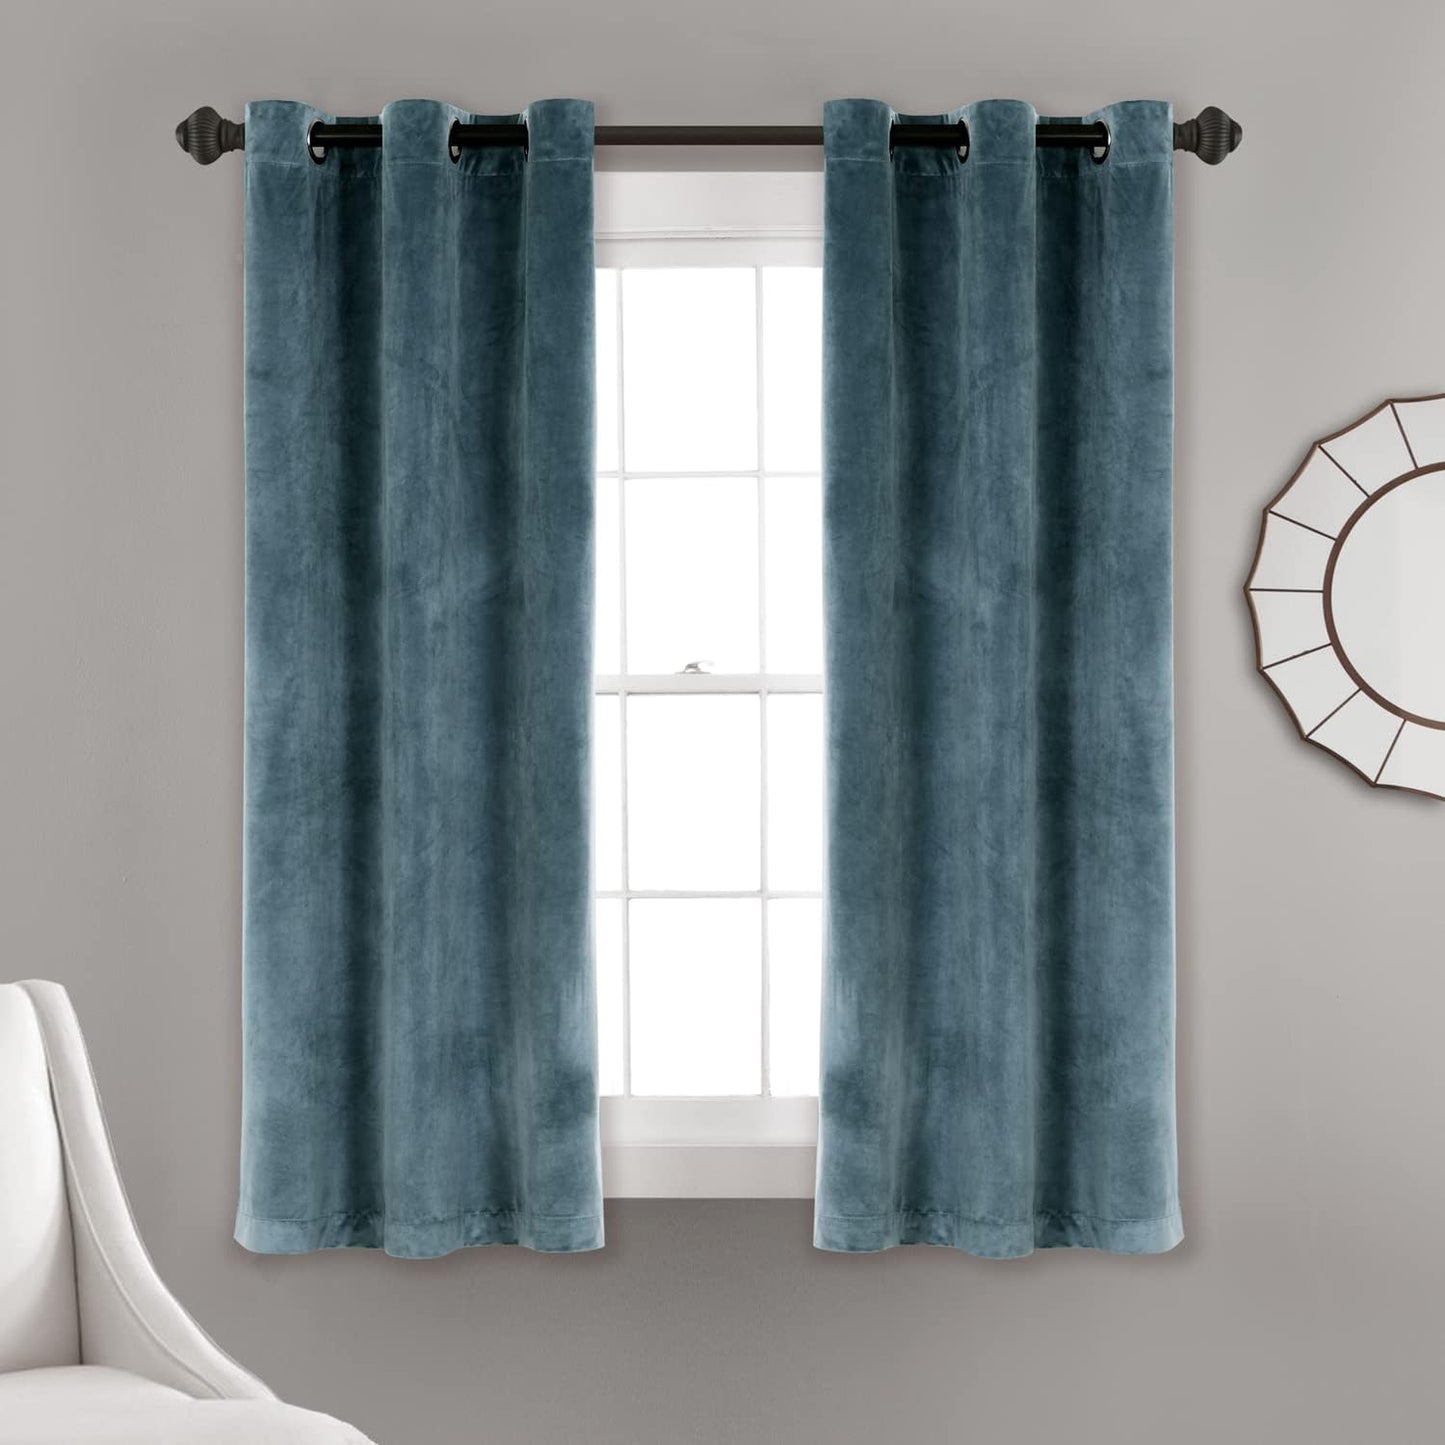 Lush Decor Prima Velvet Curtains Color Block Light Filtering Window Panel Set for Living, Dining, Bedroom (Pair), 38" W X 84" L, Navy  Triangle Home Fashions Slate Blue Room Darkening 63"L X 38"W